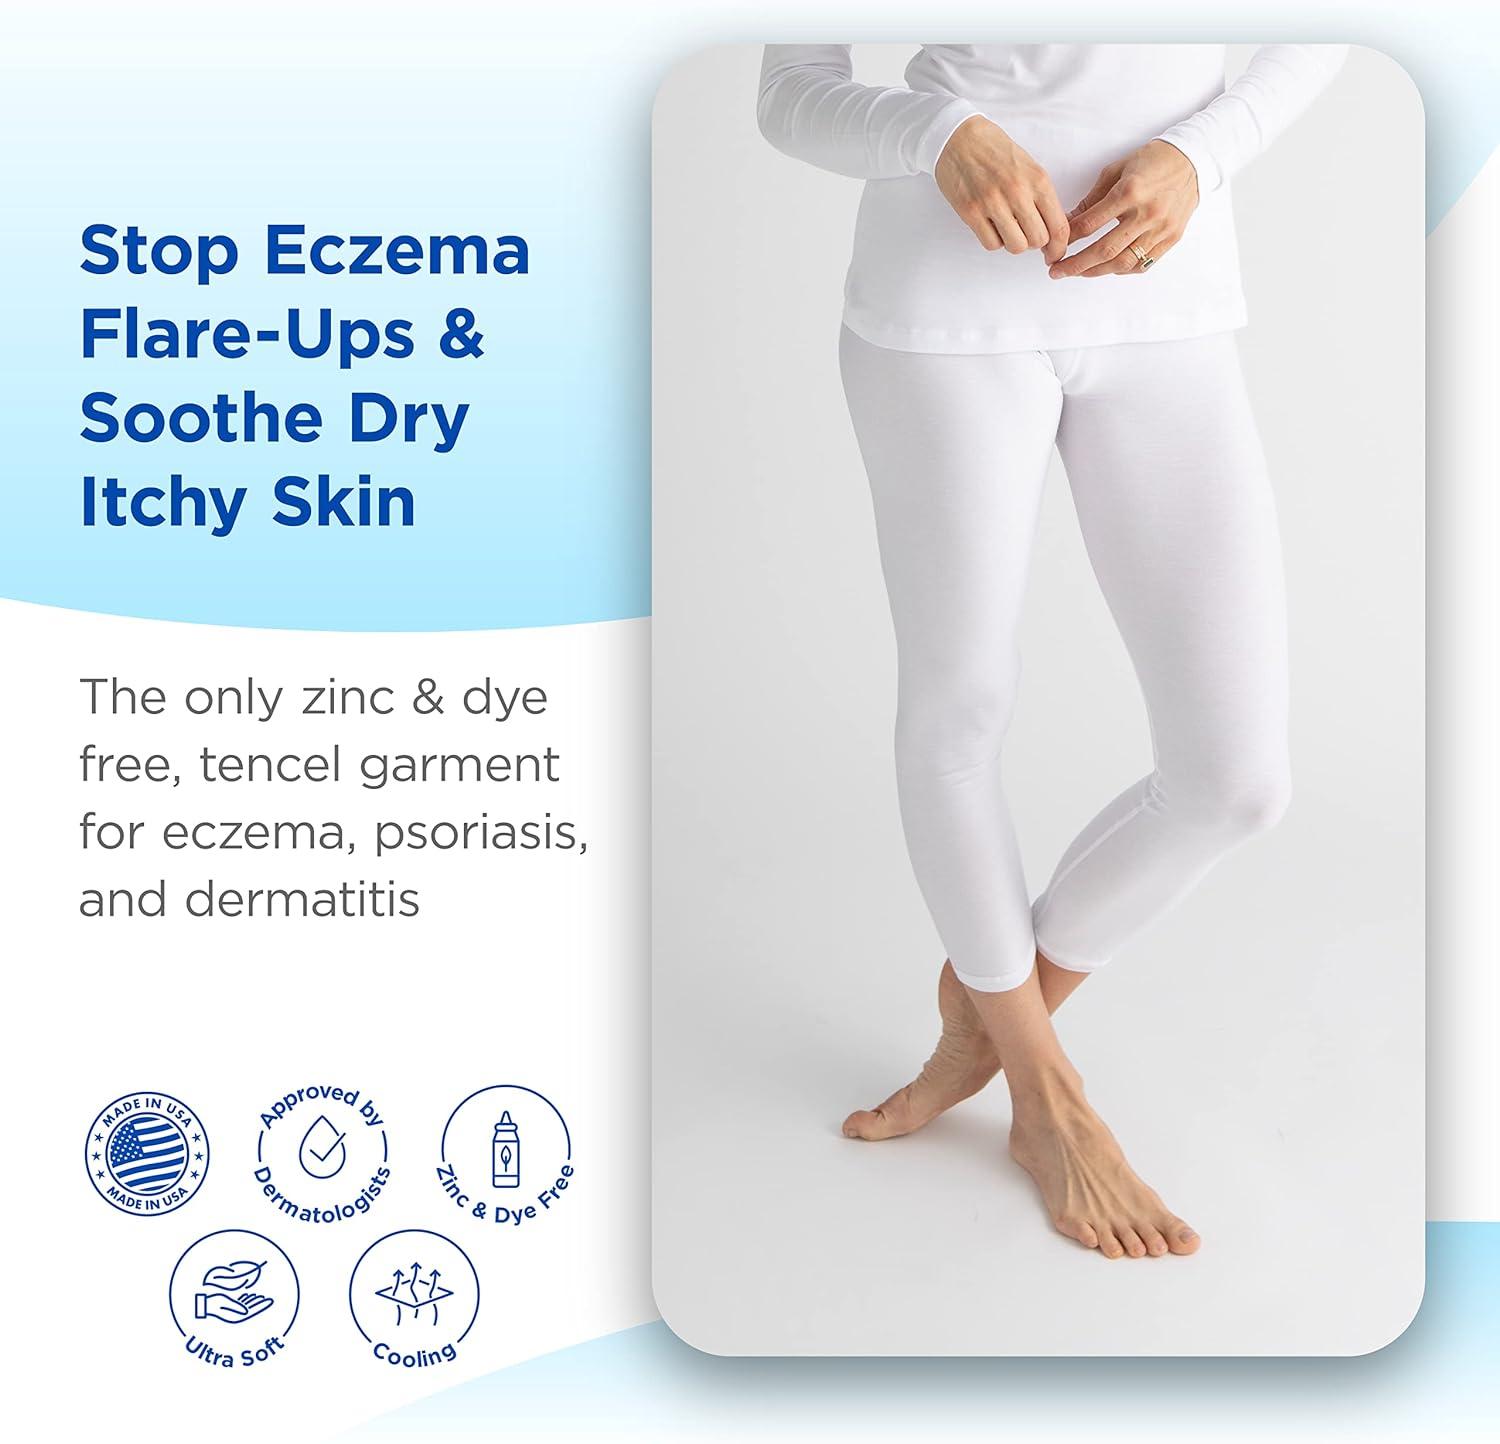 Eczema Clothing for Adults - Psoriasis Treatment Pants for Men and Women -  Itch Relief Ultra-Soft and Eco-Friendly - AD RescueWear - No Zinc or Dyes  (Extra Large) XL